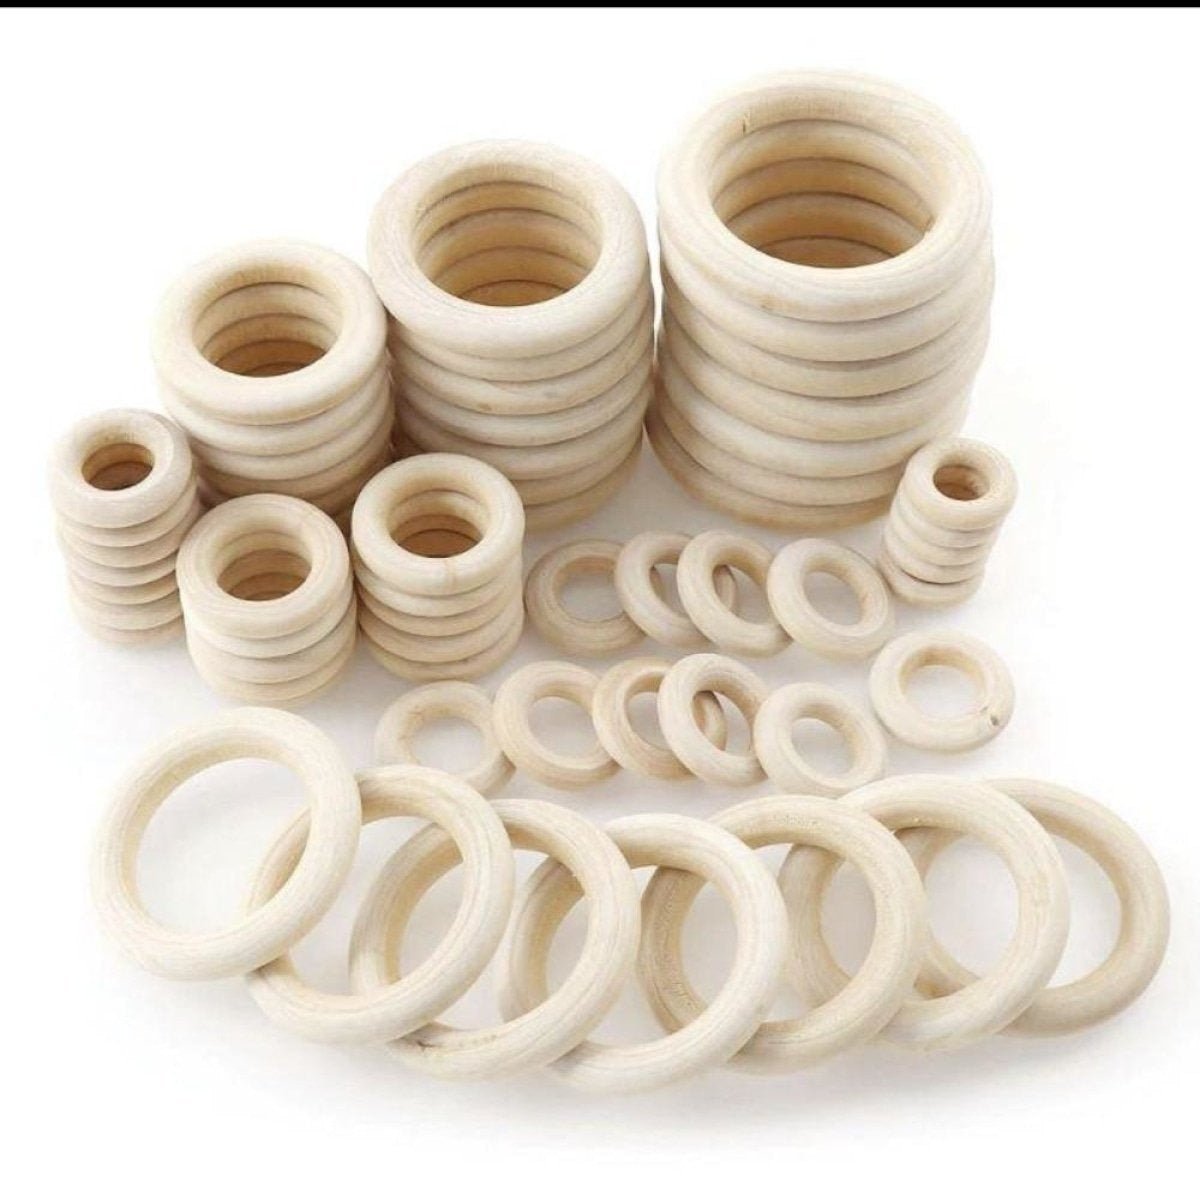 Natural Wood DIY 15mm-100mm Wooden Beads Pendant Connectors Circles Rings Beads Unfinished Craft Natural Wood Wall Hanging Ornament - 15mm 50pcs - Asia Sell